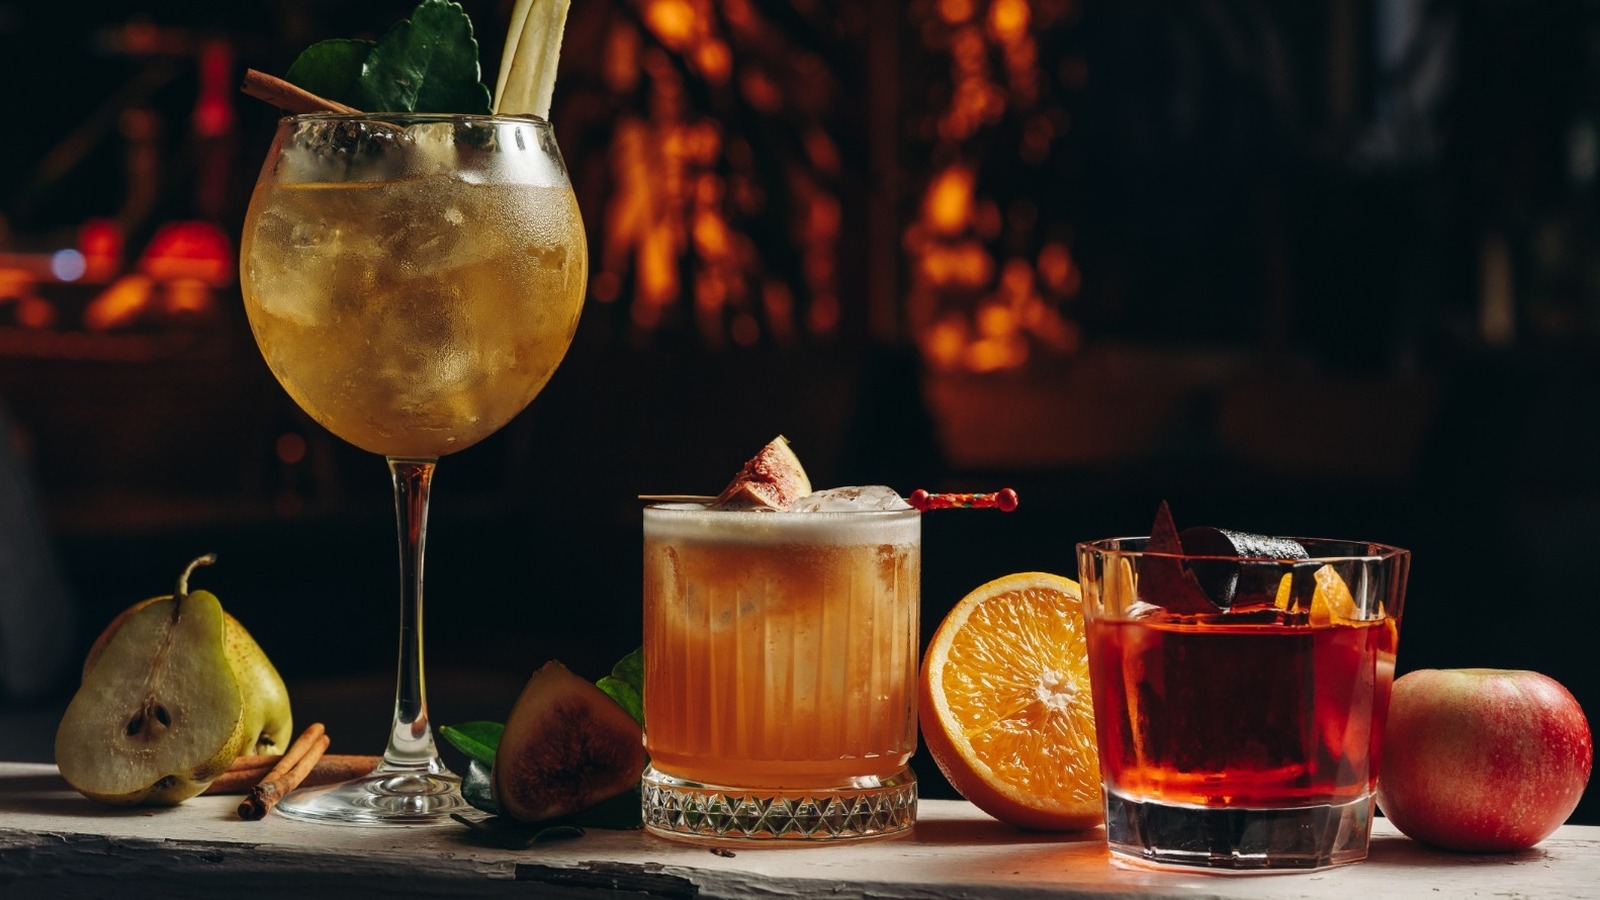 https://www.thedailymeal.com/img/gallery/15-forgotten-cocktails-you-should-order/l-intro-1678819853.jpg